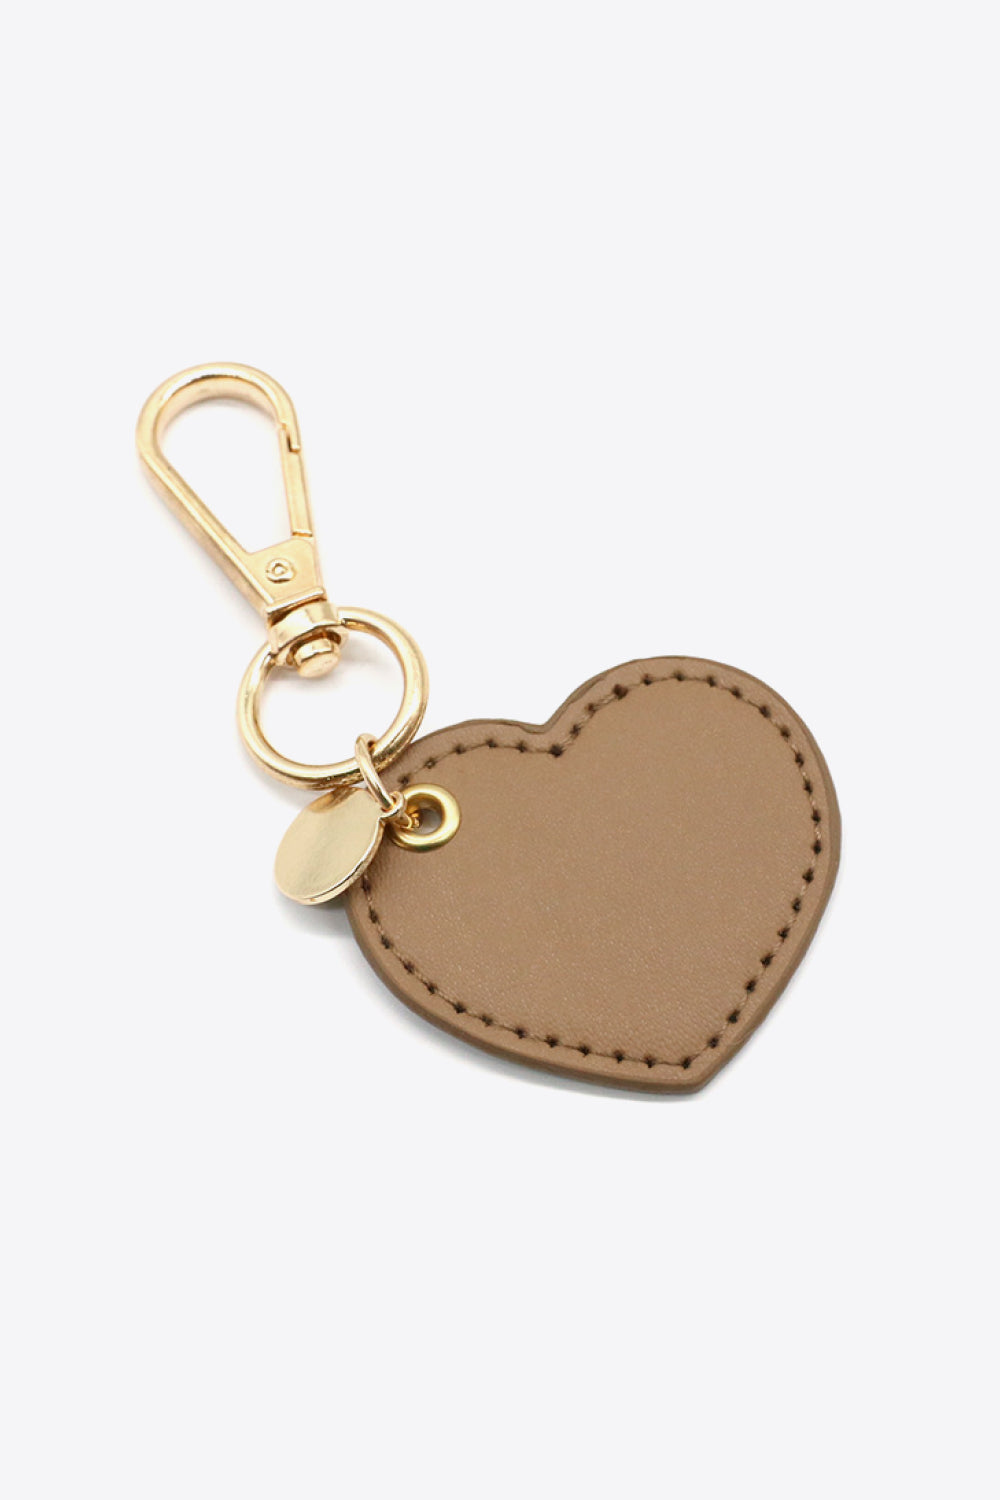 Trendsi Cupid Beauty Supplies Taupe / One Size Keychains Assorted 4-Pack Heart Shape PU Leather Keychain